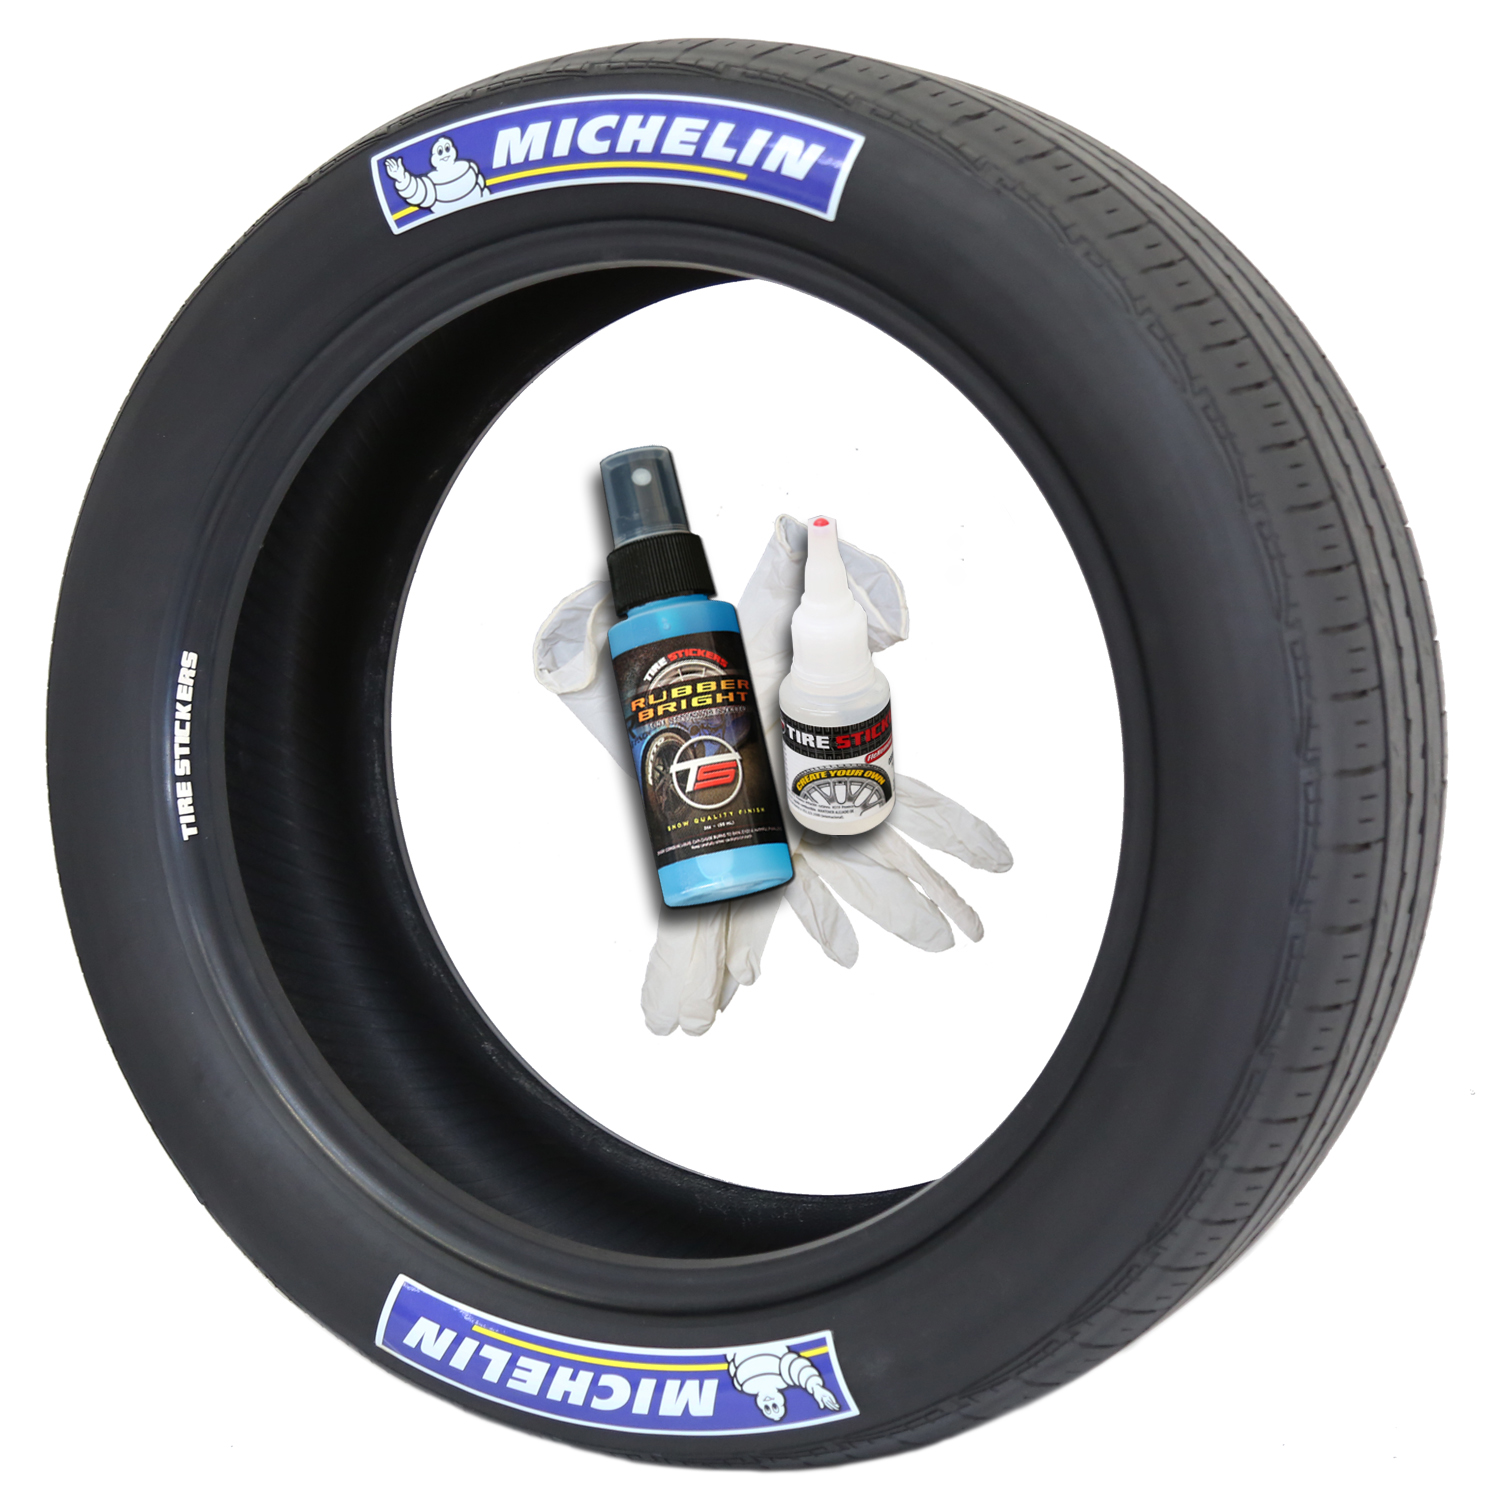 Tire Stickers Cleaner